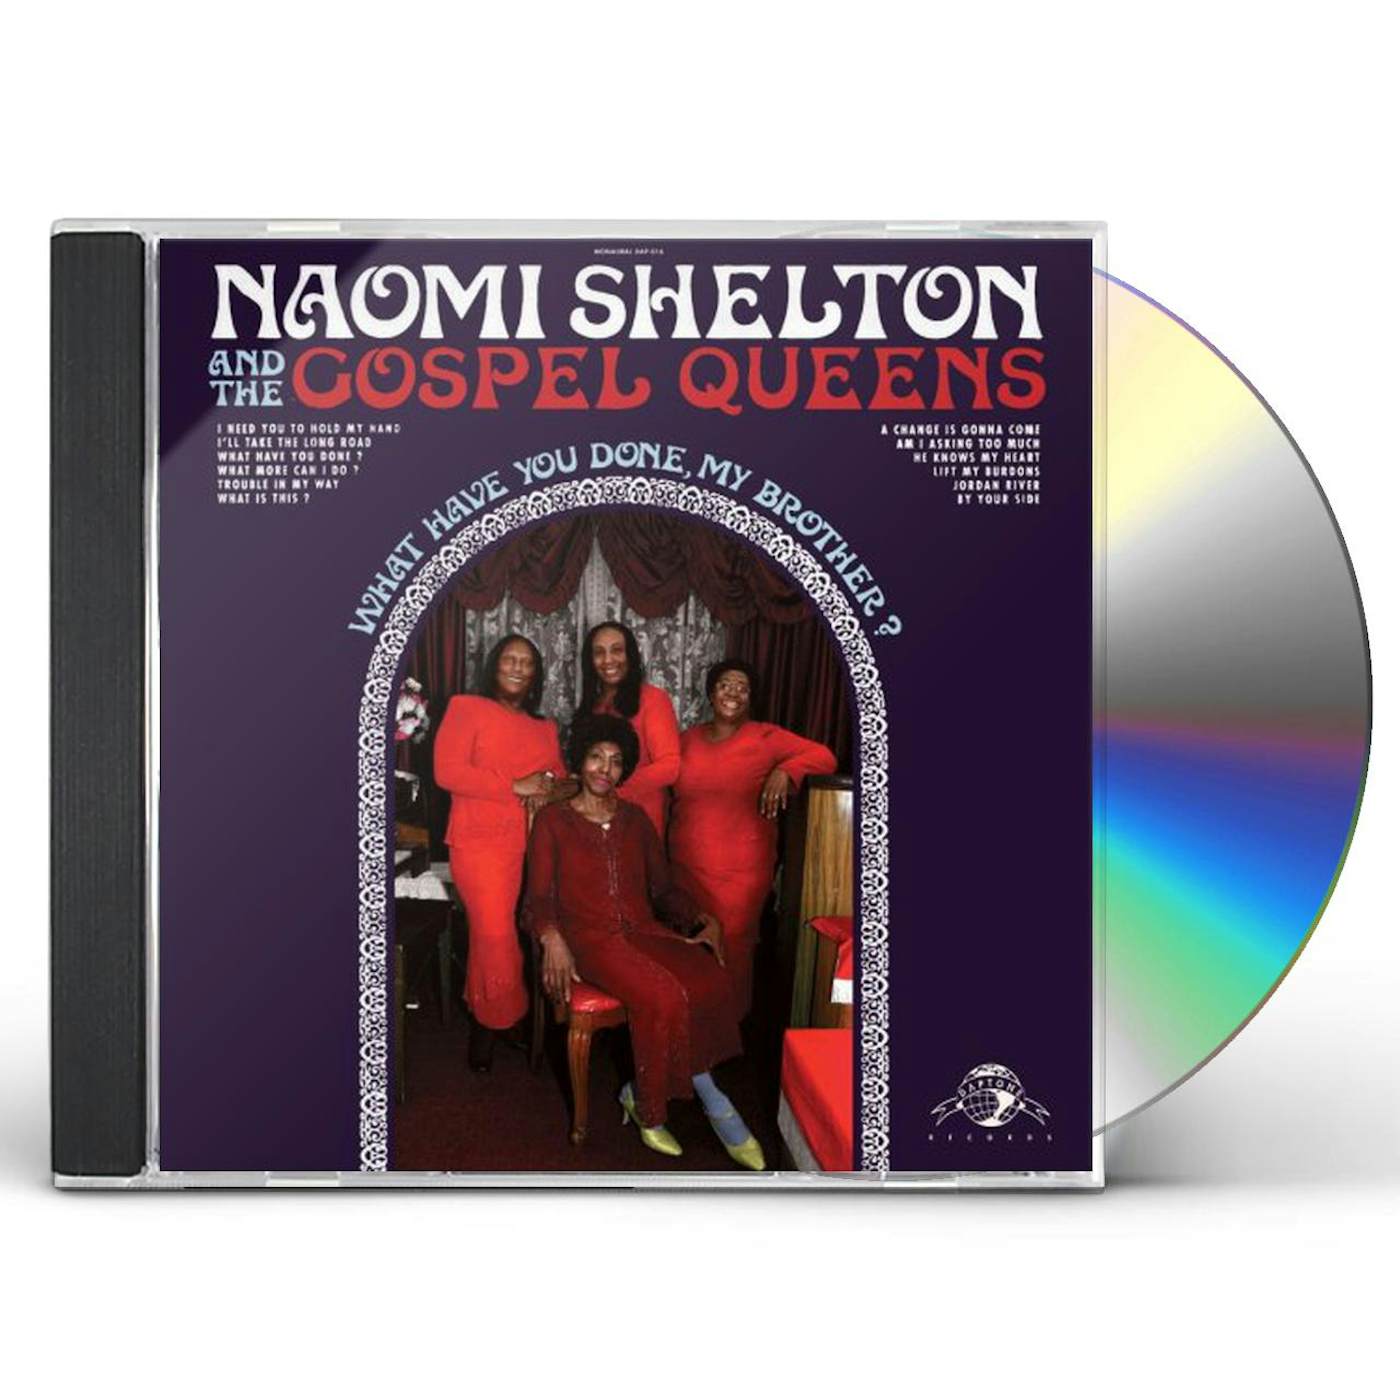 Naomi Shelton & the Gospel Queens WHAT HAVE YOU DONE MY BROTHER CD